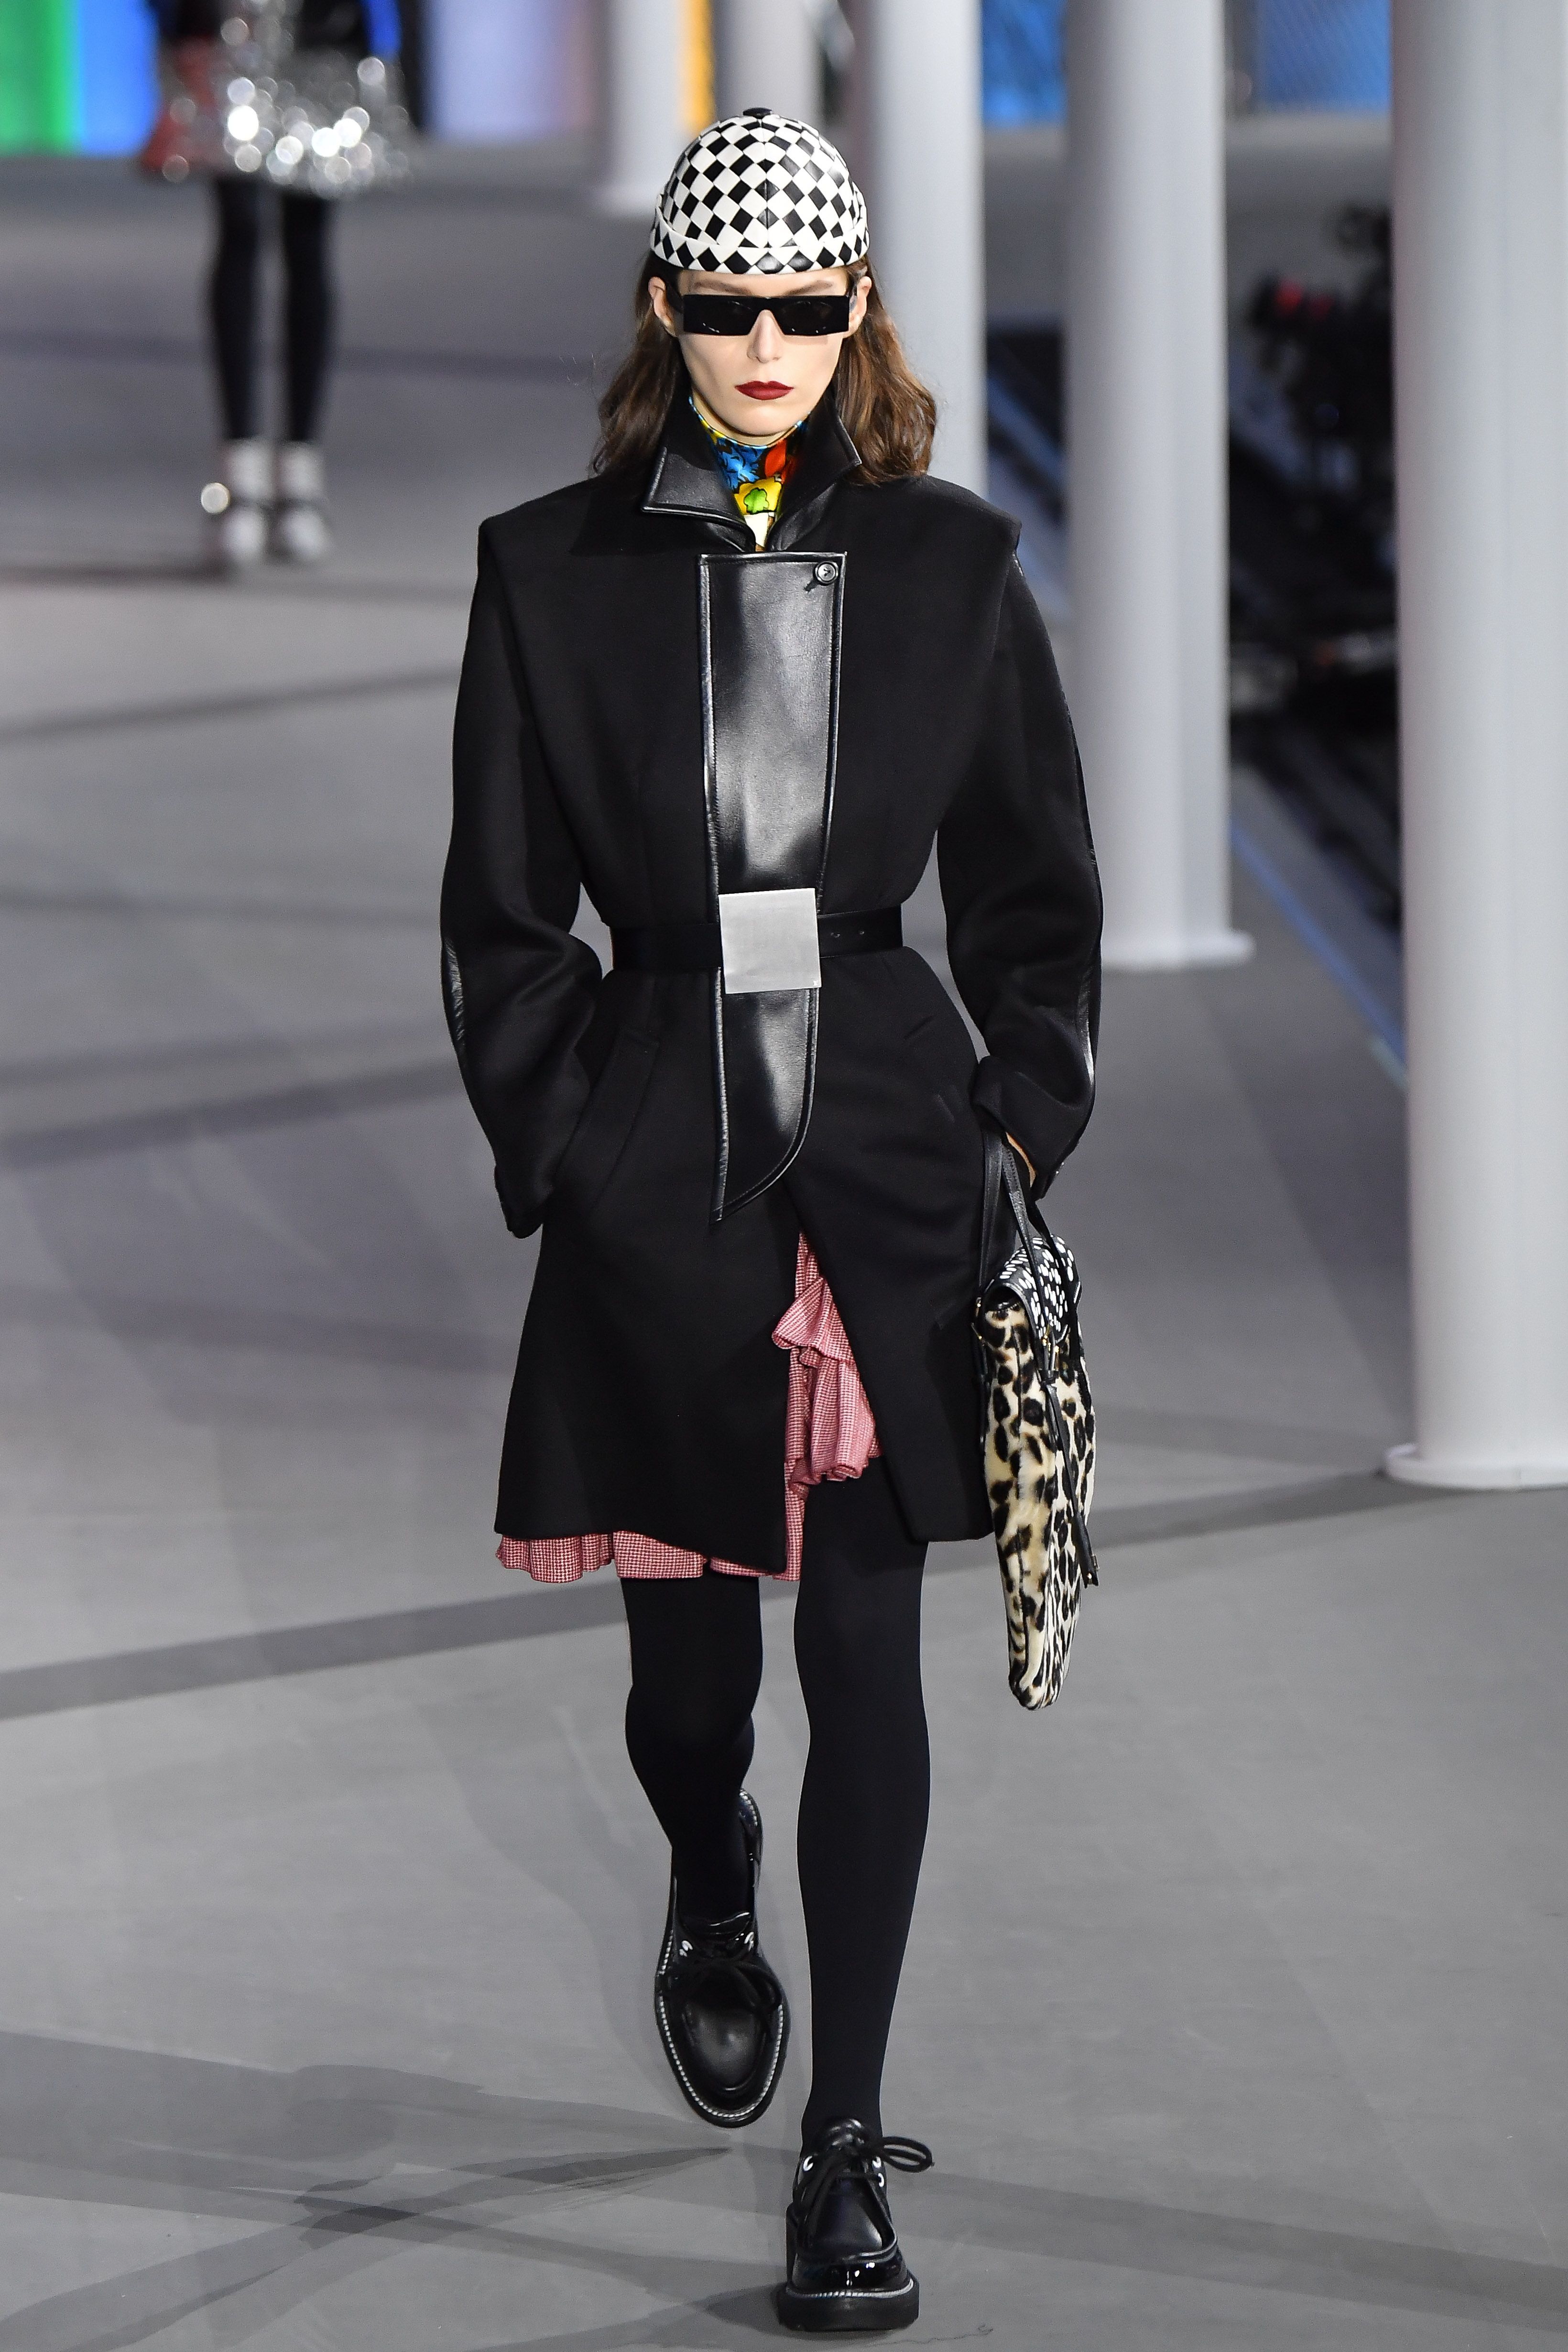 A look from the Louis Vuitton Women's Fall-Winter 2019 Fashion Show by Nicolas  Ghesquière, presented in Paris, France.